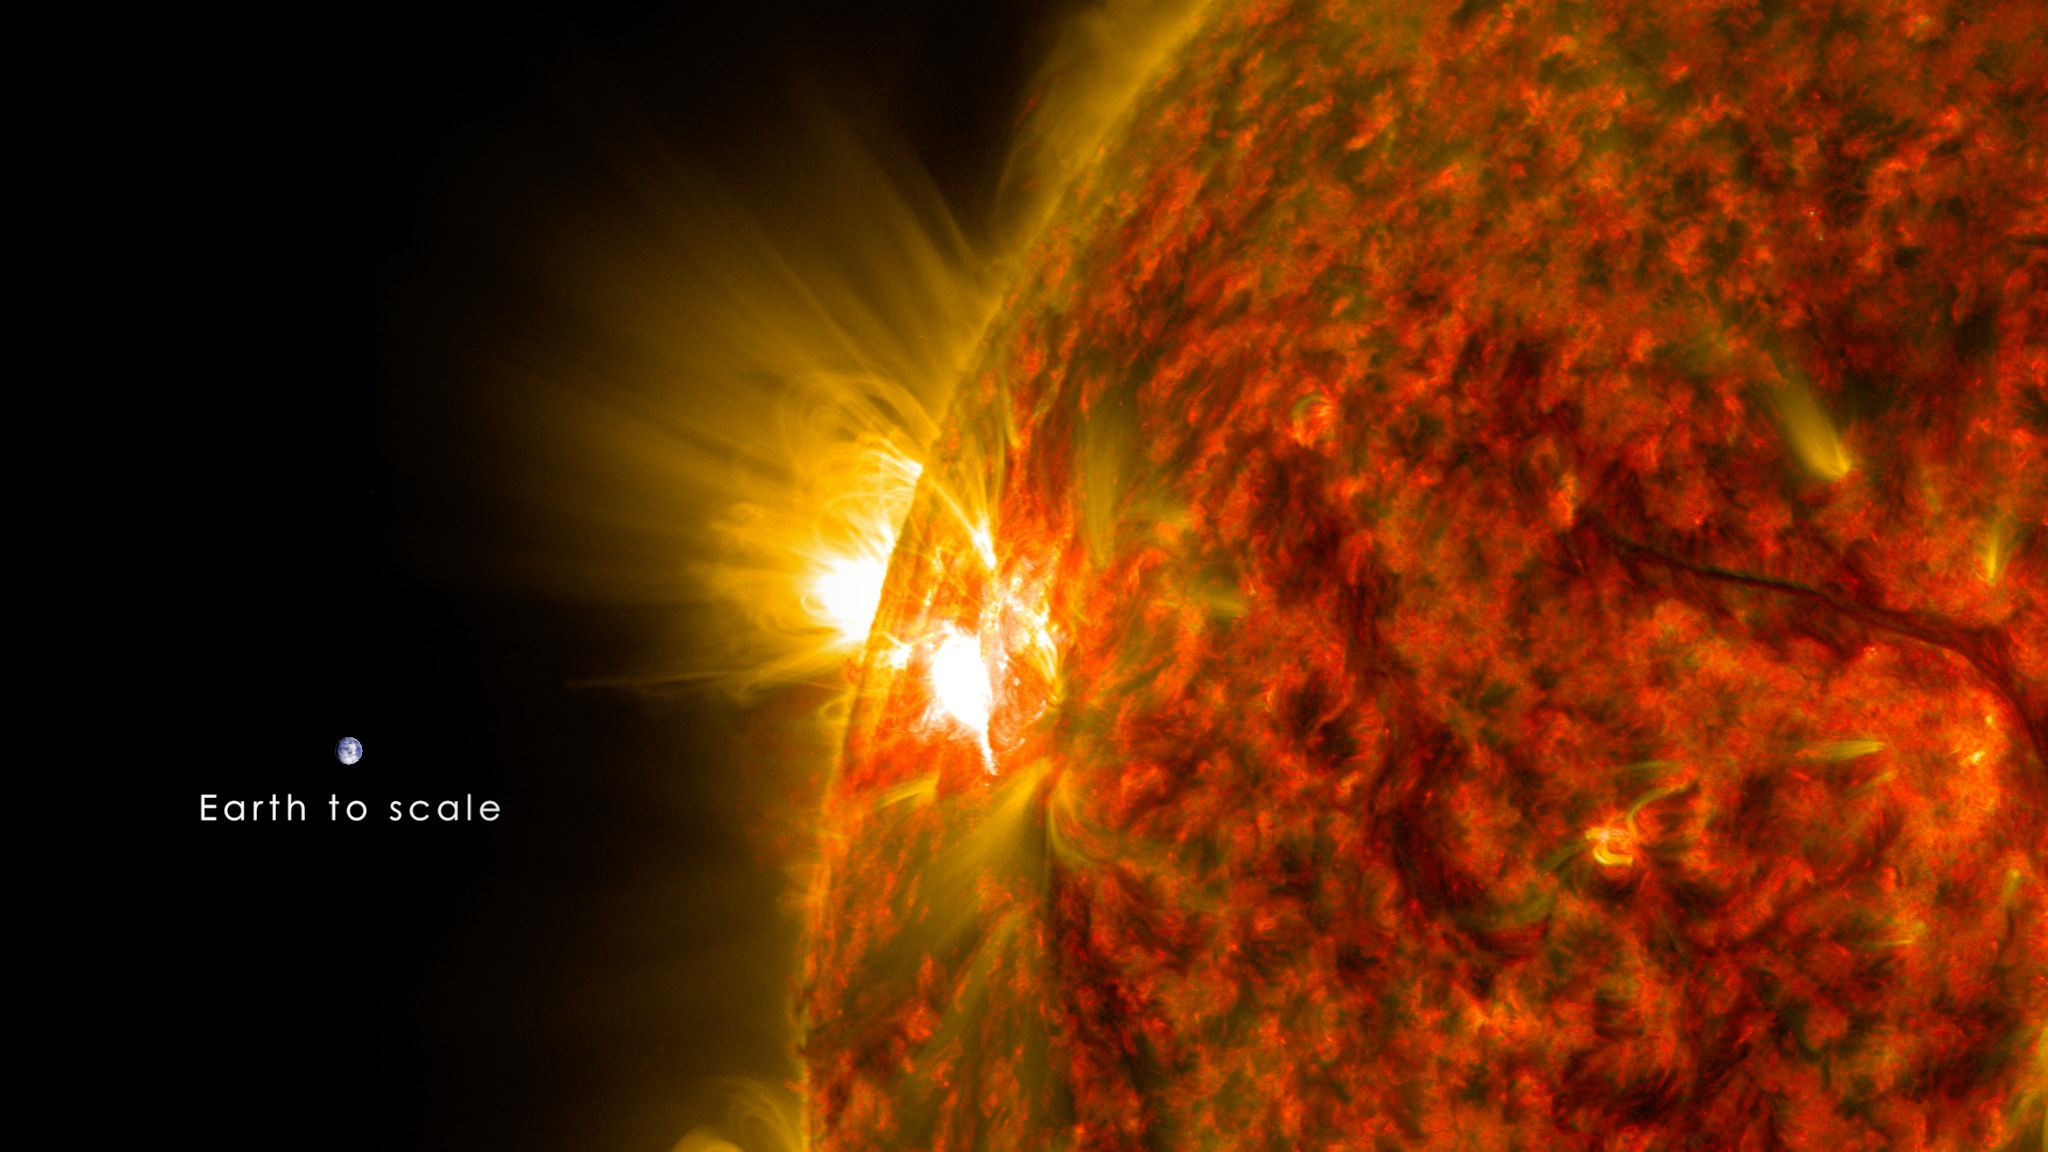 An active region on the sun erupted with a mid-level flare on Nov. 5, 2014, as seen in the bright light of this image captured by NASA's Solar Dynamics Observatory. This image shows extreme ultraviolet light that highlights the hot solar material in the sun's atmosphere. Shown here with the Earth to scale.Credit: NASA/GSFC/SDO